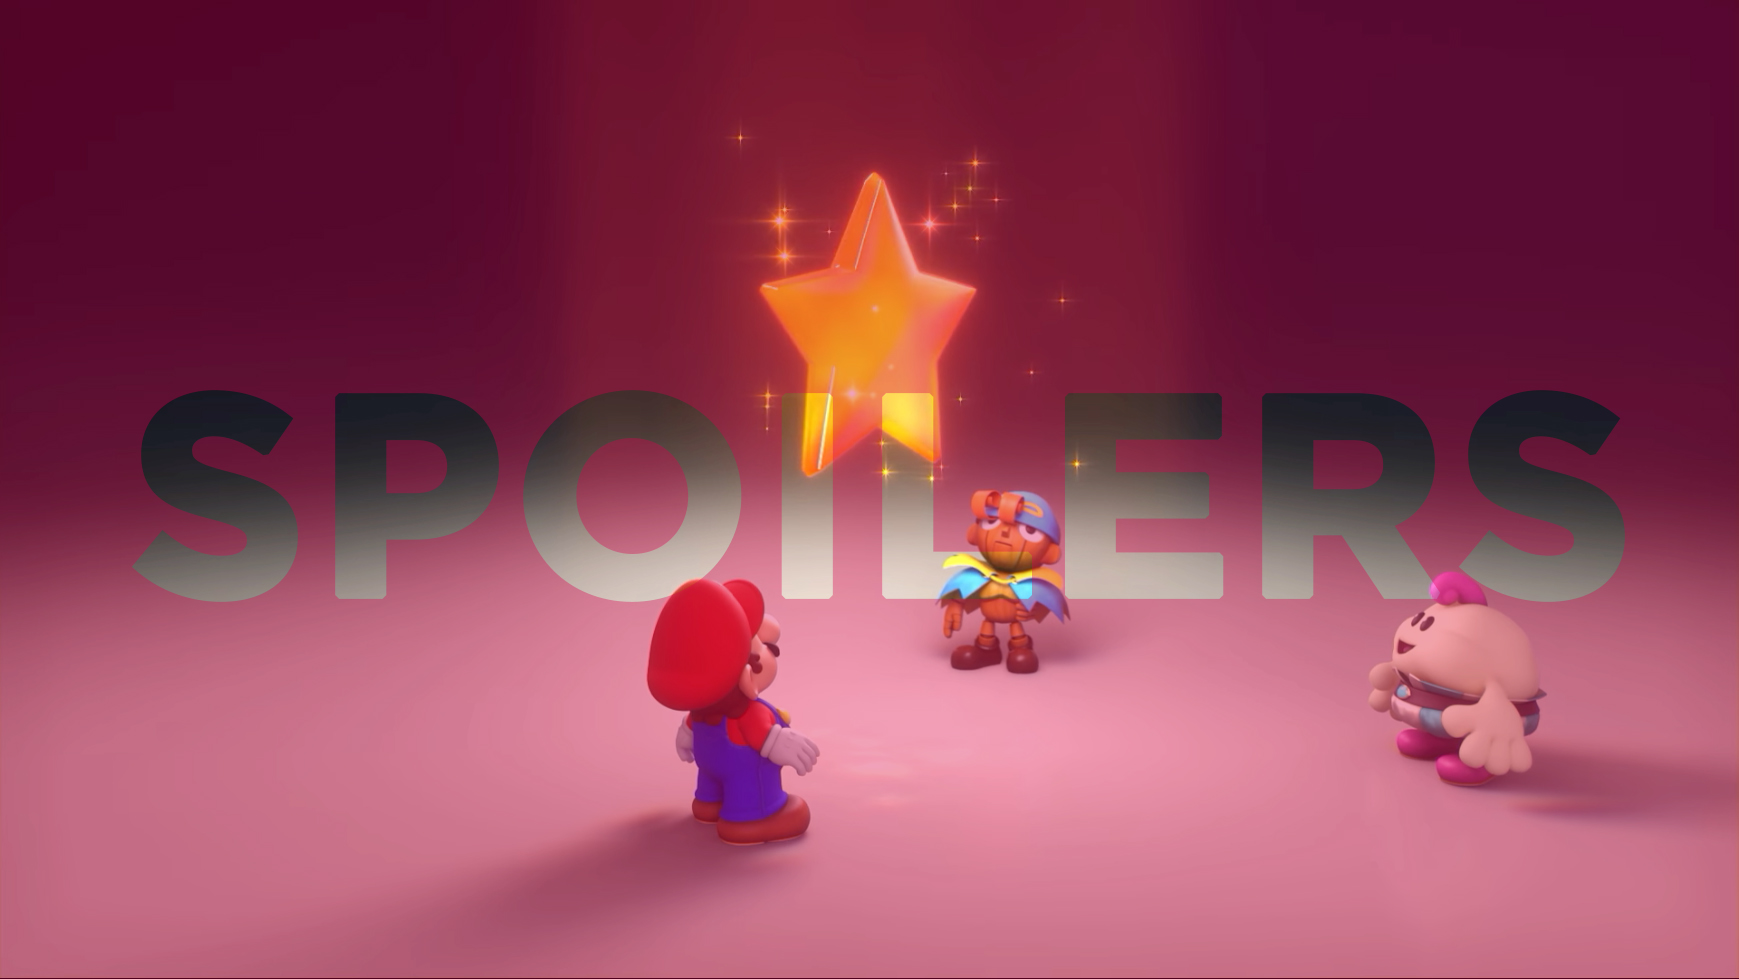 Mario, Geno, and Mallow claim a star in Super Mario RPG with the words “spoilers” on top.